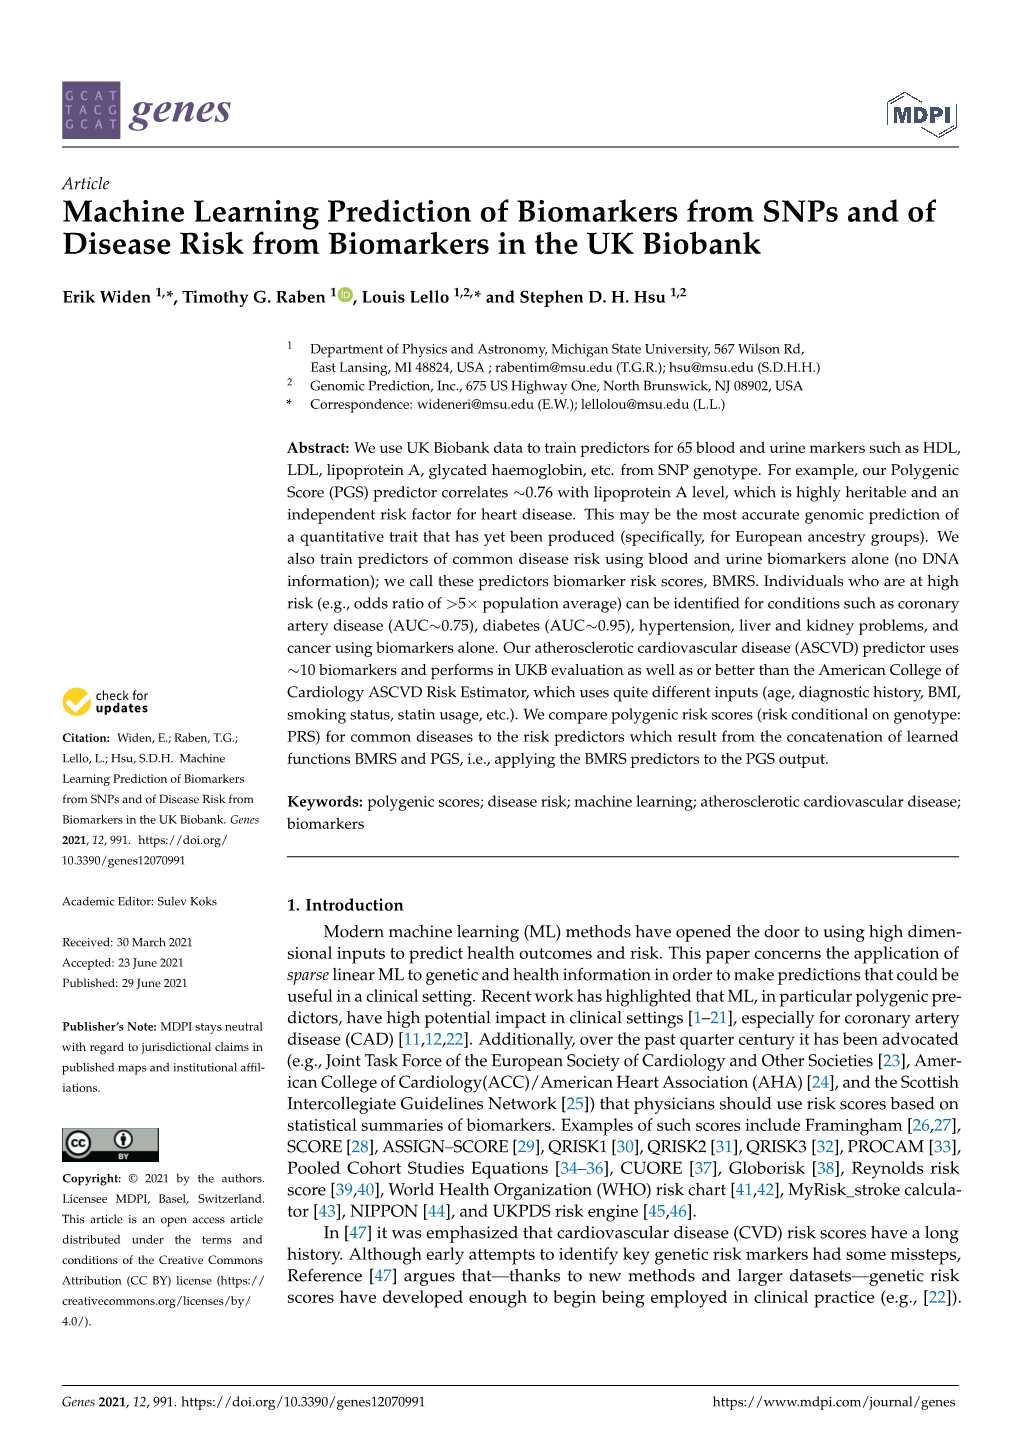 Machine Learning Prediction of Biomarkers from Snps and of Disease Risk from Biomarkers in the UK Biobank